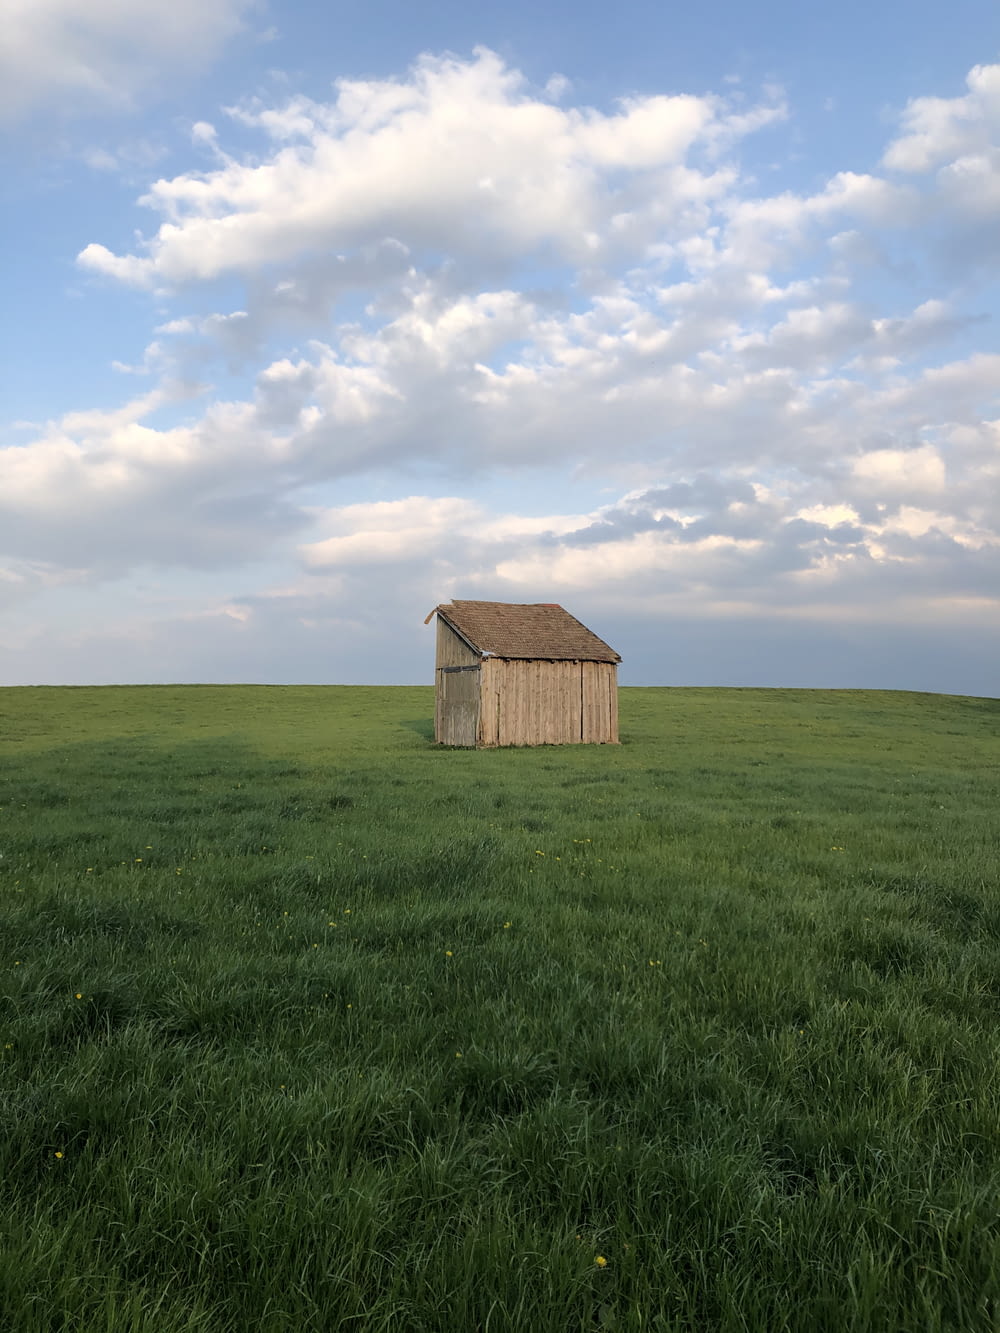 brown wooden house on green grass field under white clouds during daytime